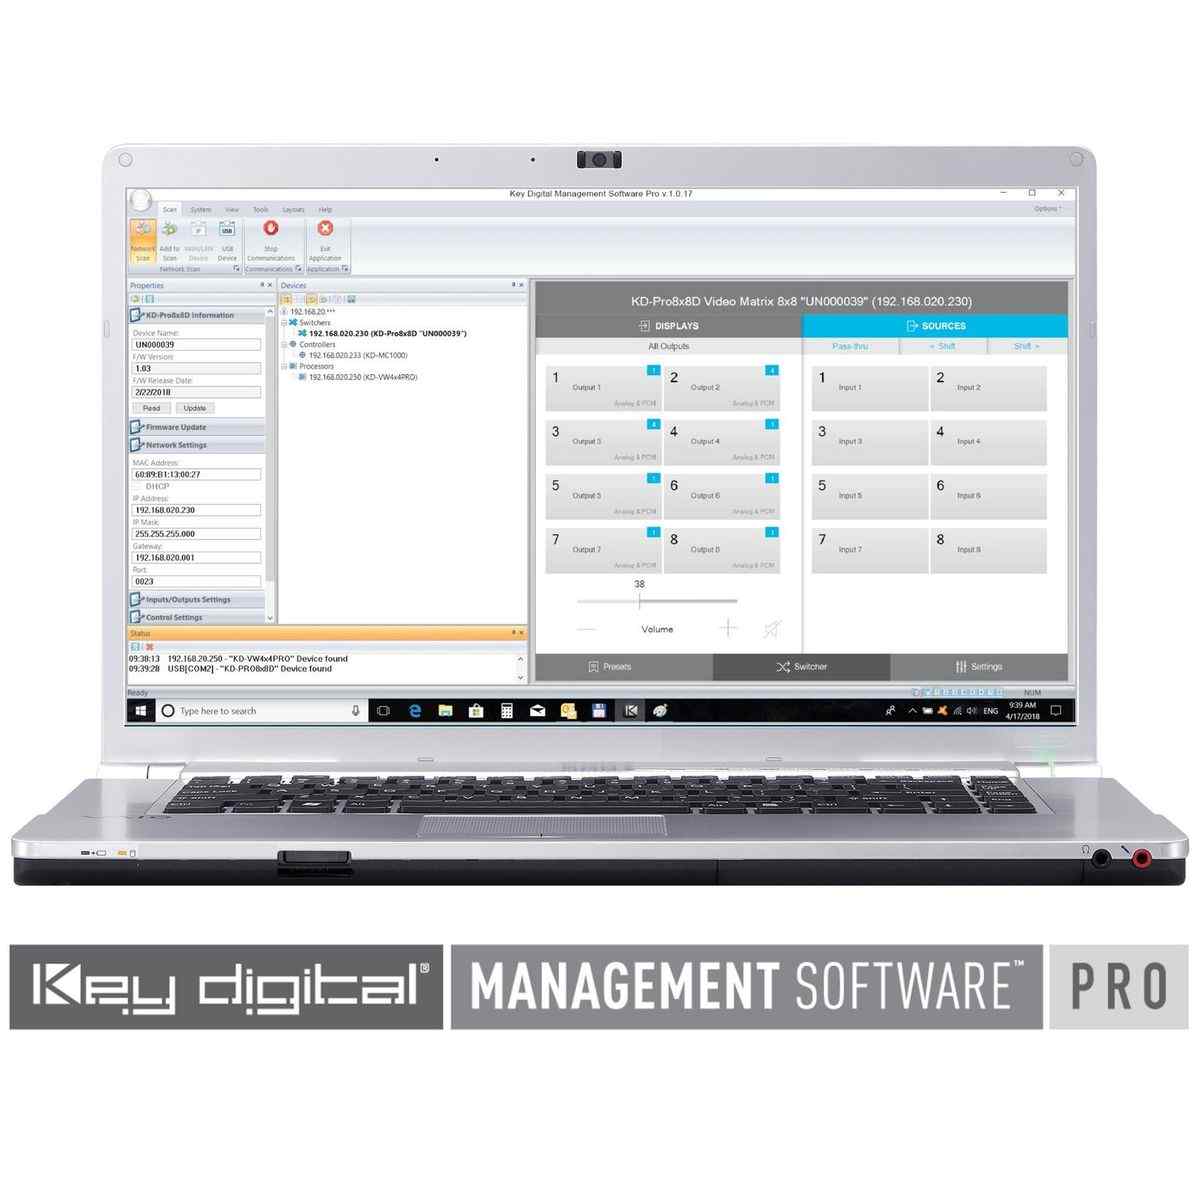 Thumbnail of KDMS™ Pro software user interface for Key digital products